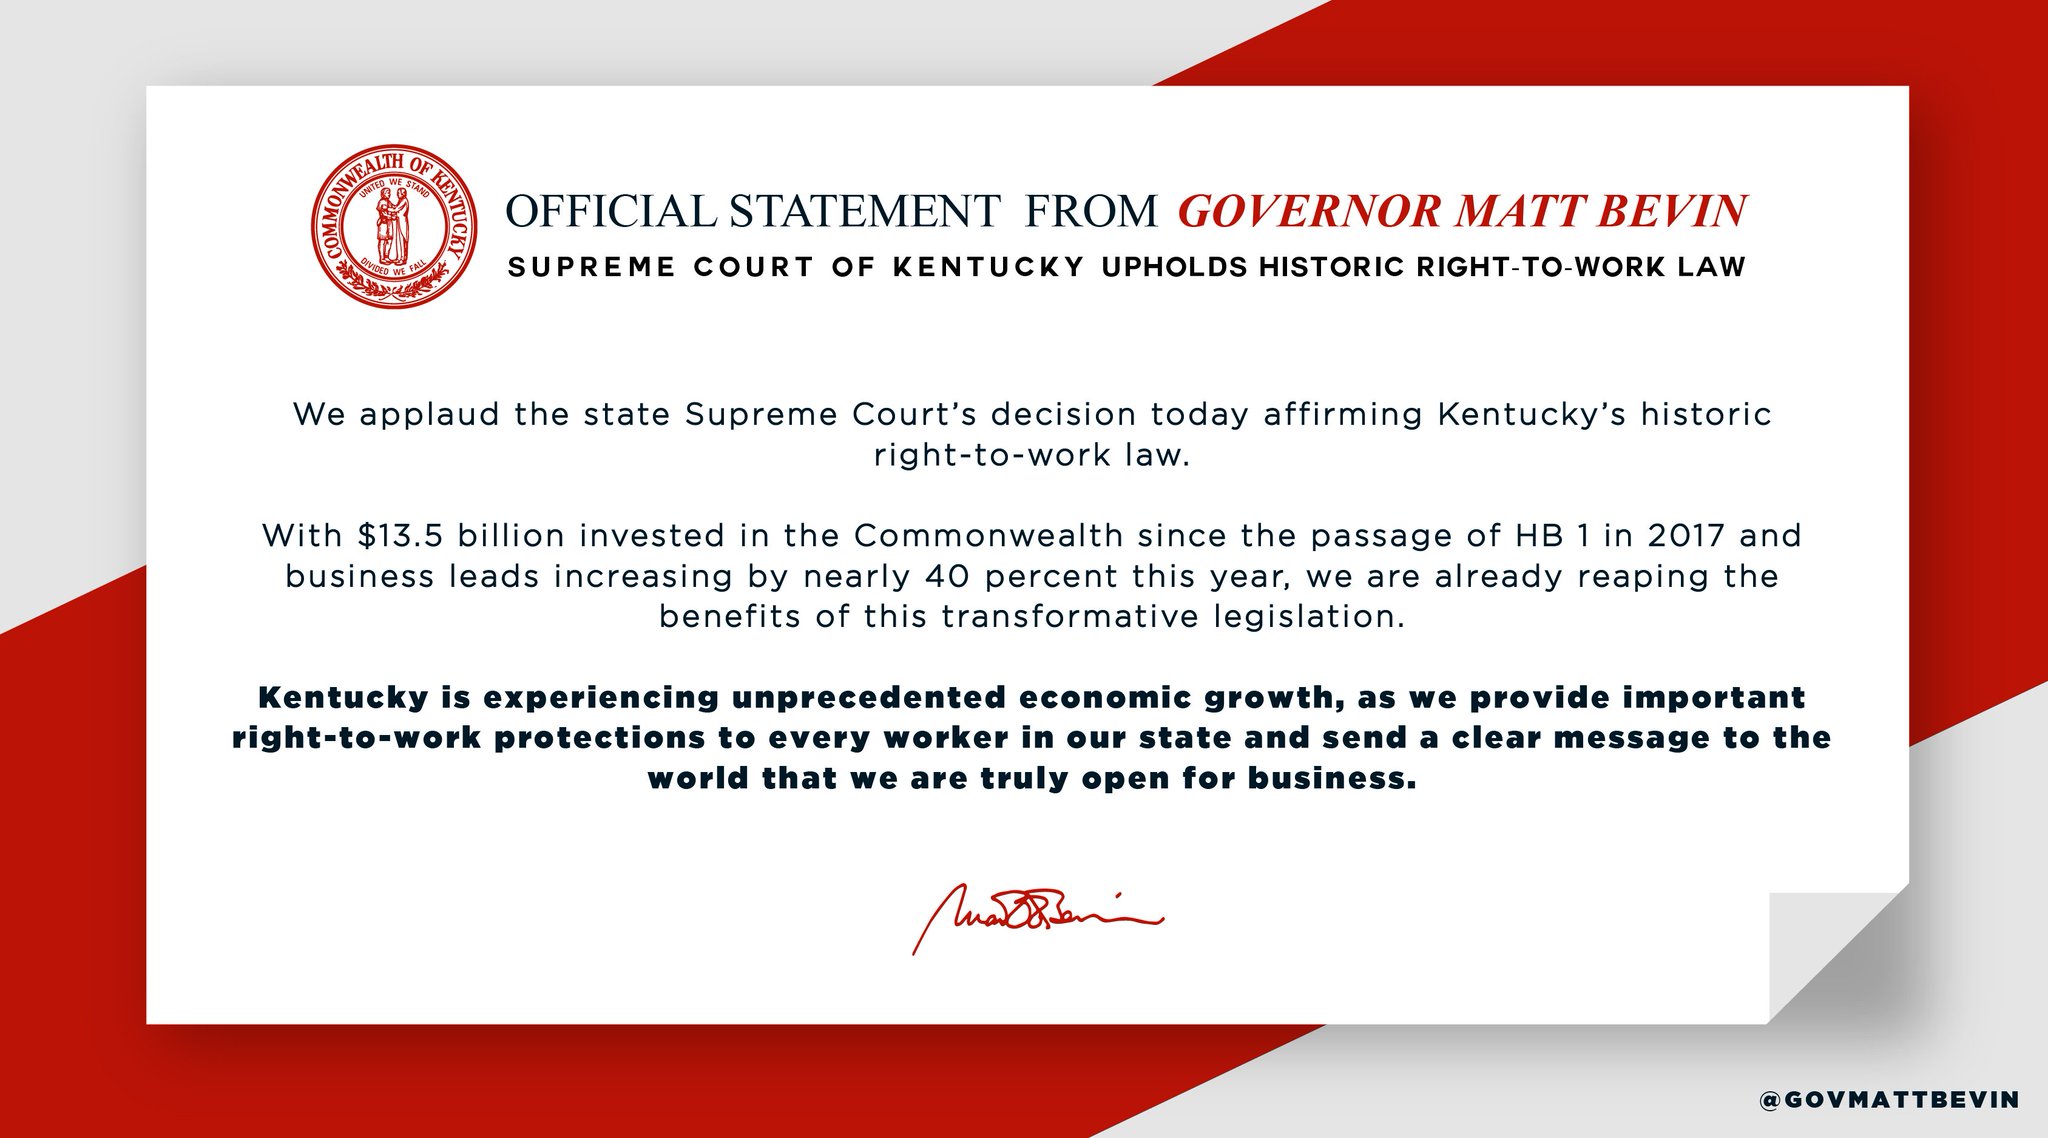 “JUST IN &gt; &gt; &gt; The Supreme Court of Kentuc...